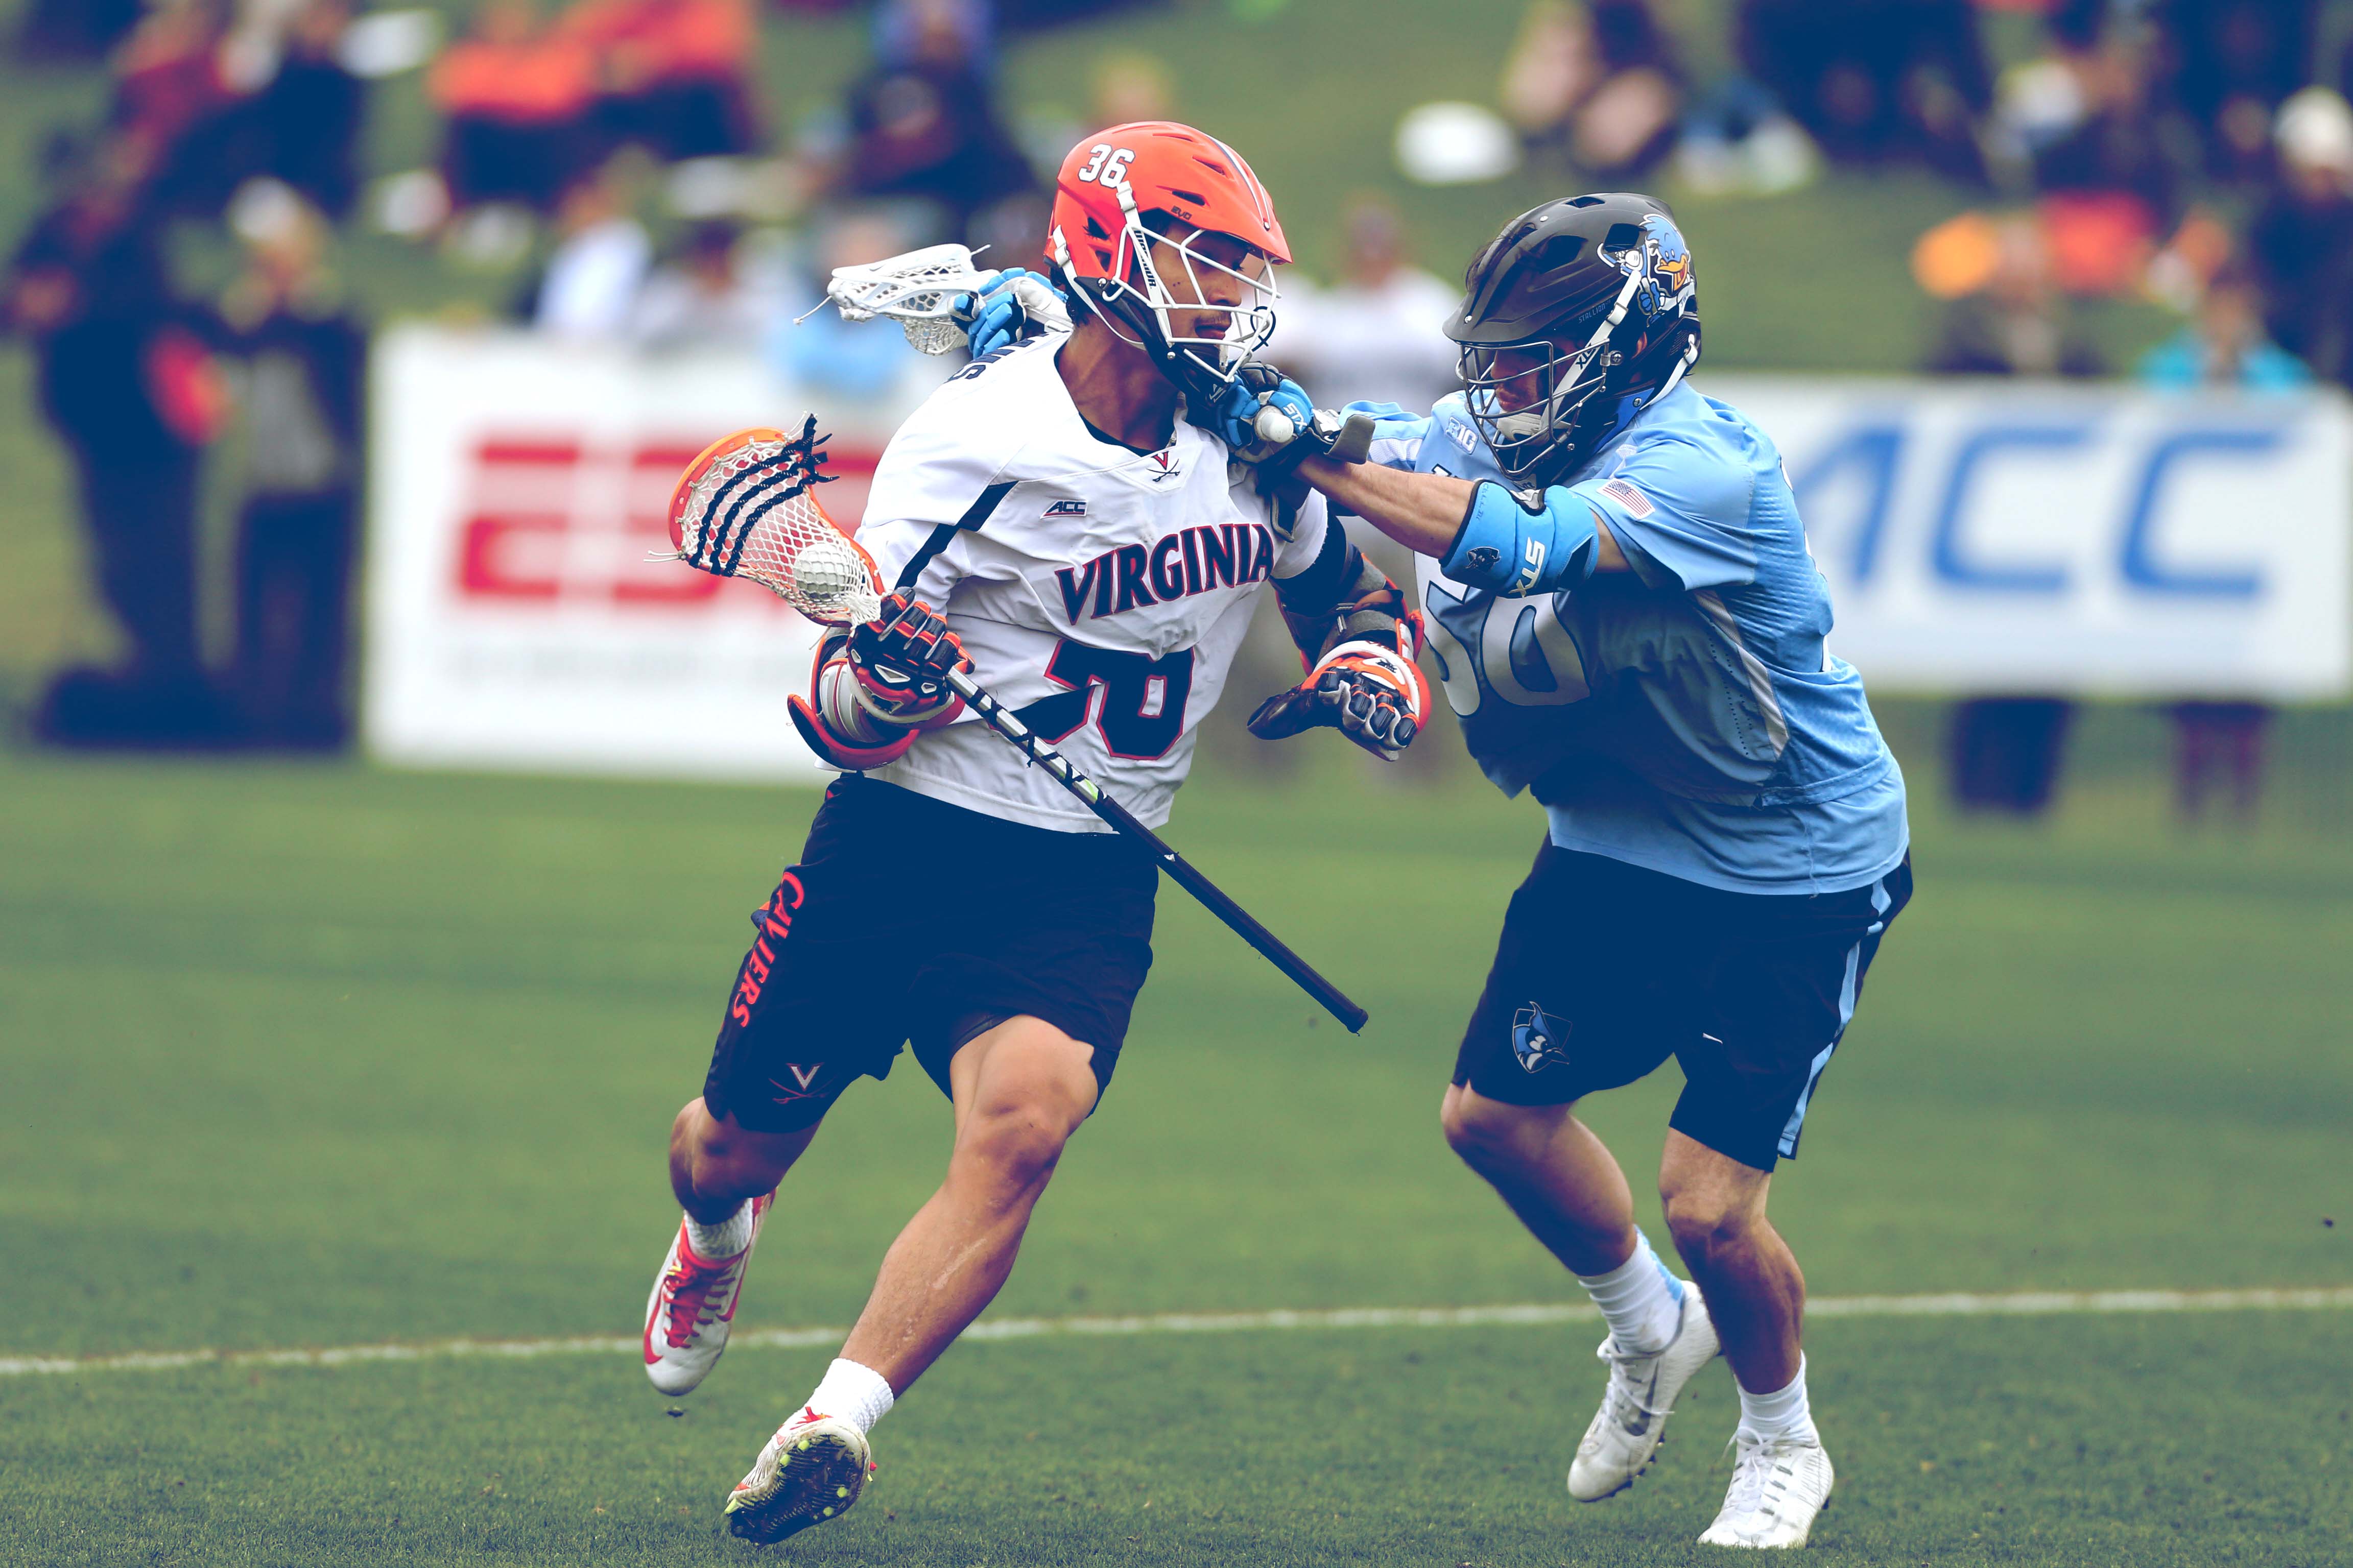 Two Lacrosse players battling on the field during a game